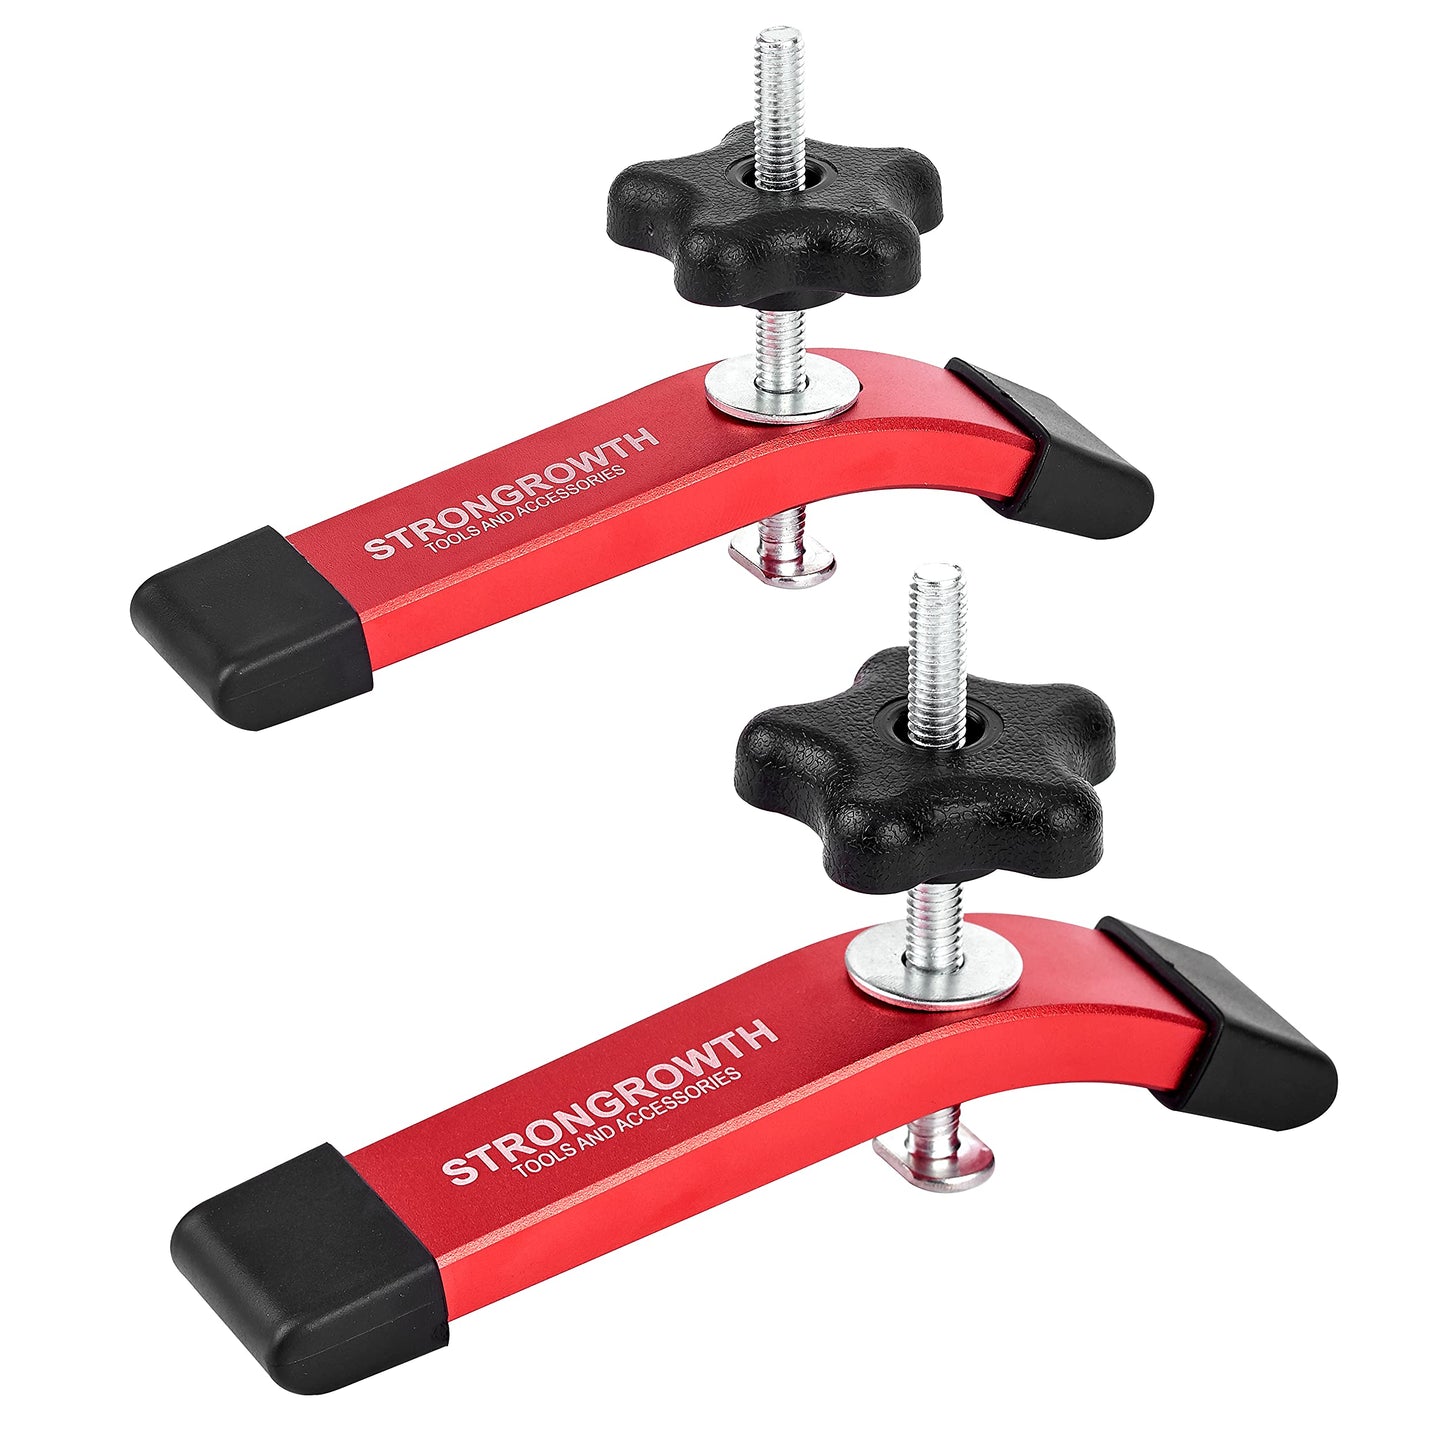 STRONGROWTH T track woodworking System Accessories- T-Track and Hold Down Clamps (T-Track Clamps 2pk)